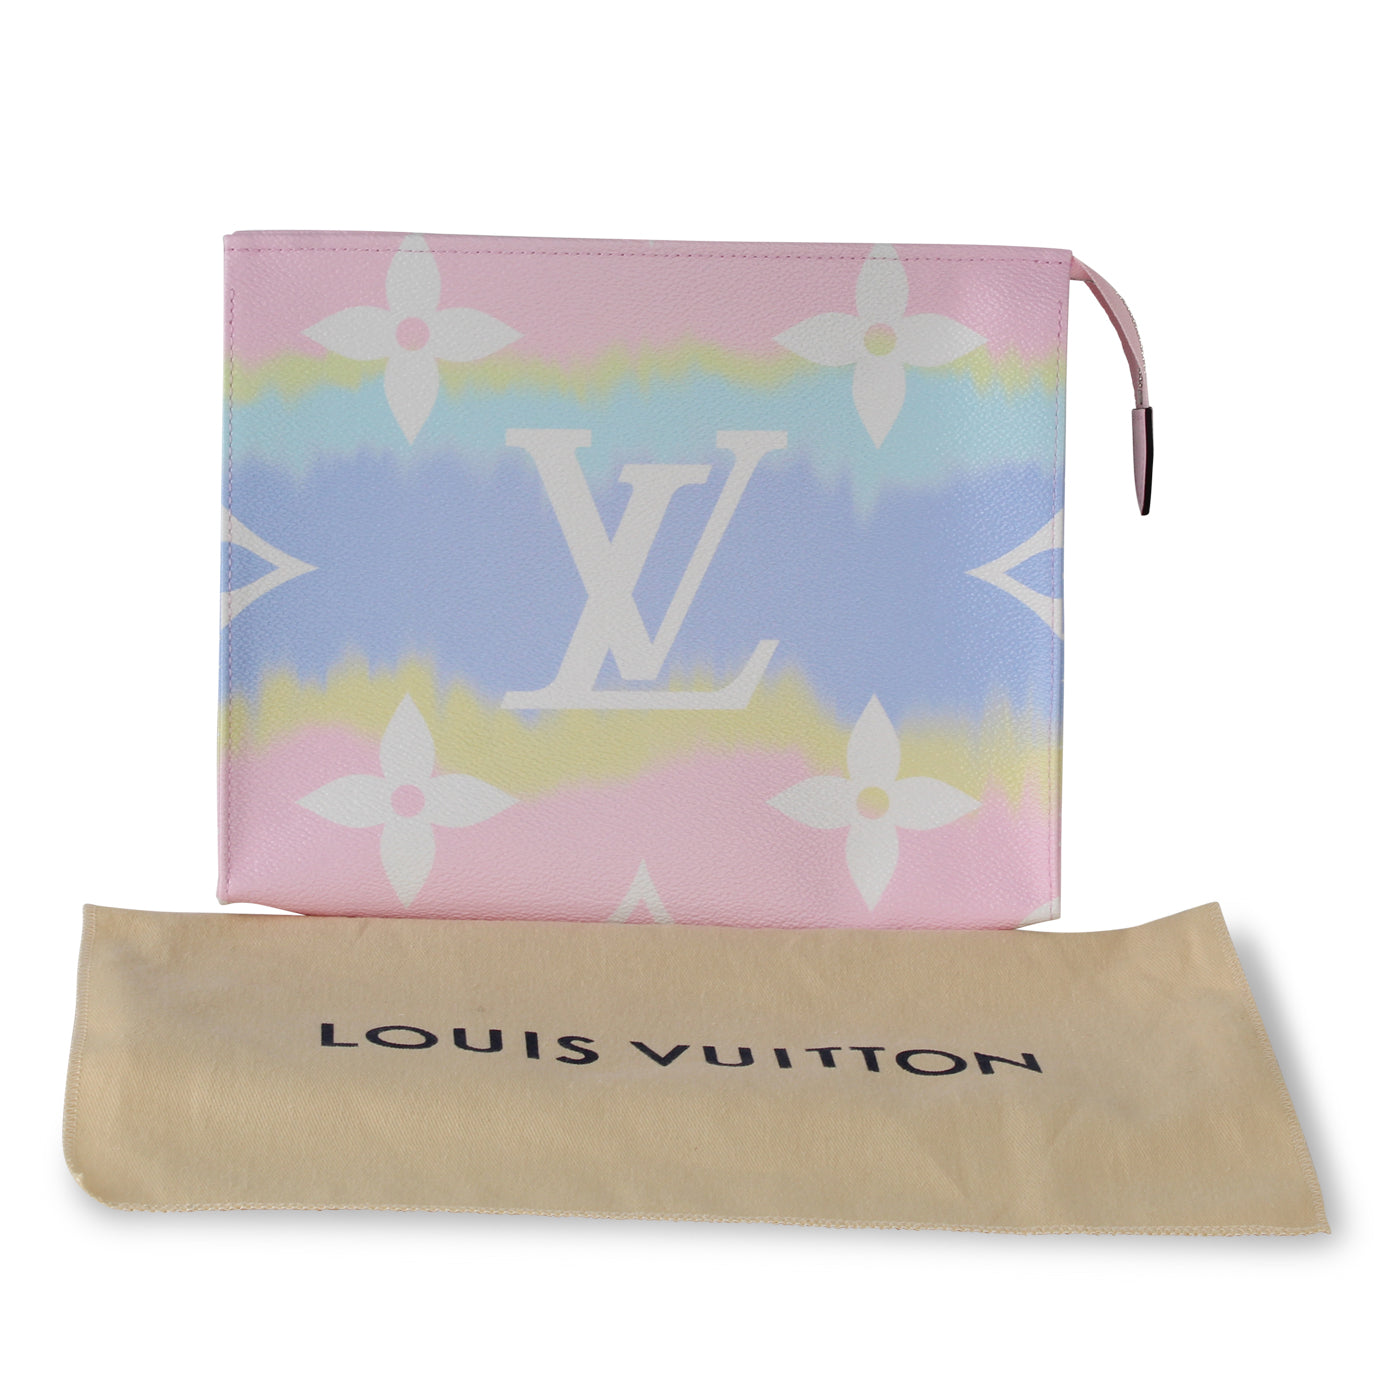 🔥NEW LOUIS VUITTON ESCALE TOILETRY 26 LARGE CLUTCH POCHETTE PINK❤️ RARE  GIFT!